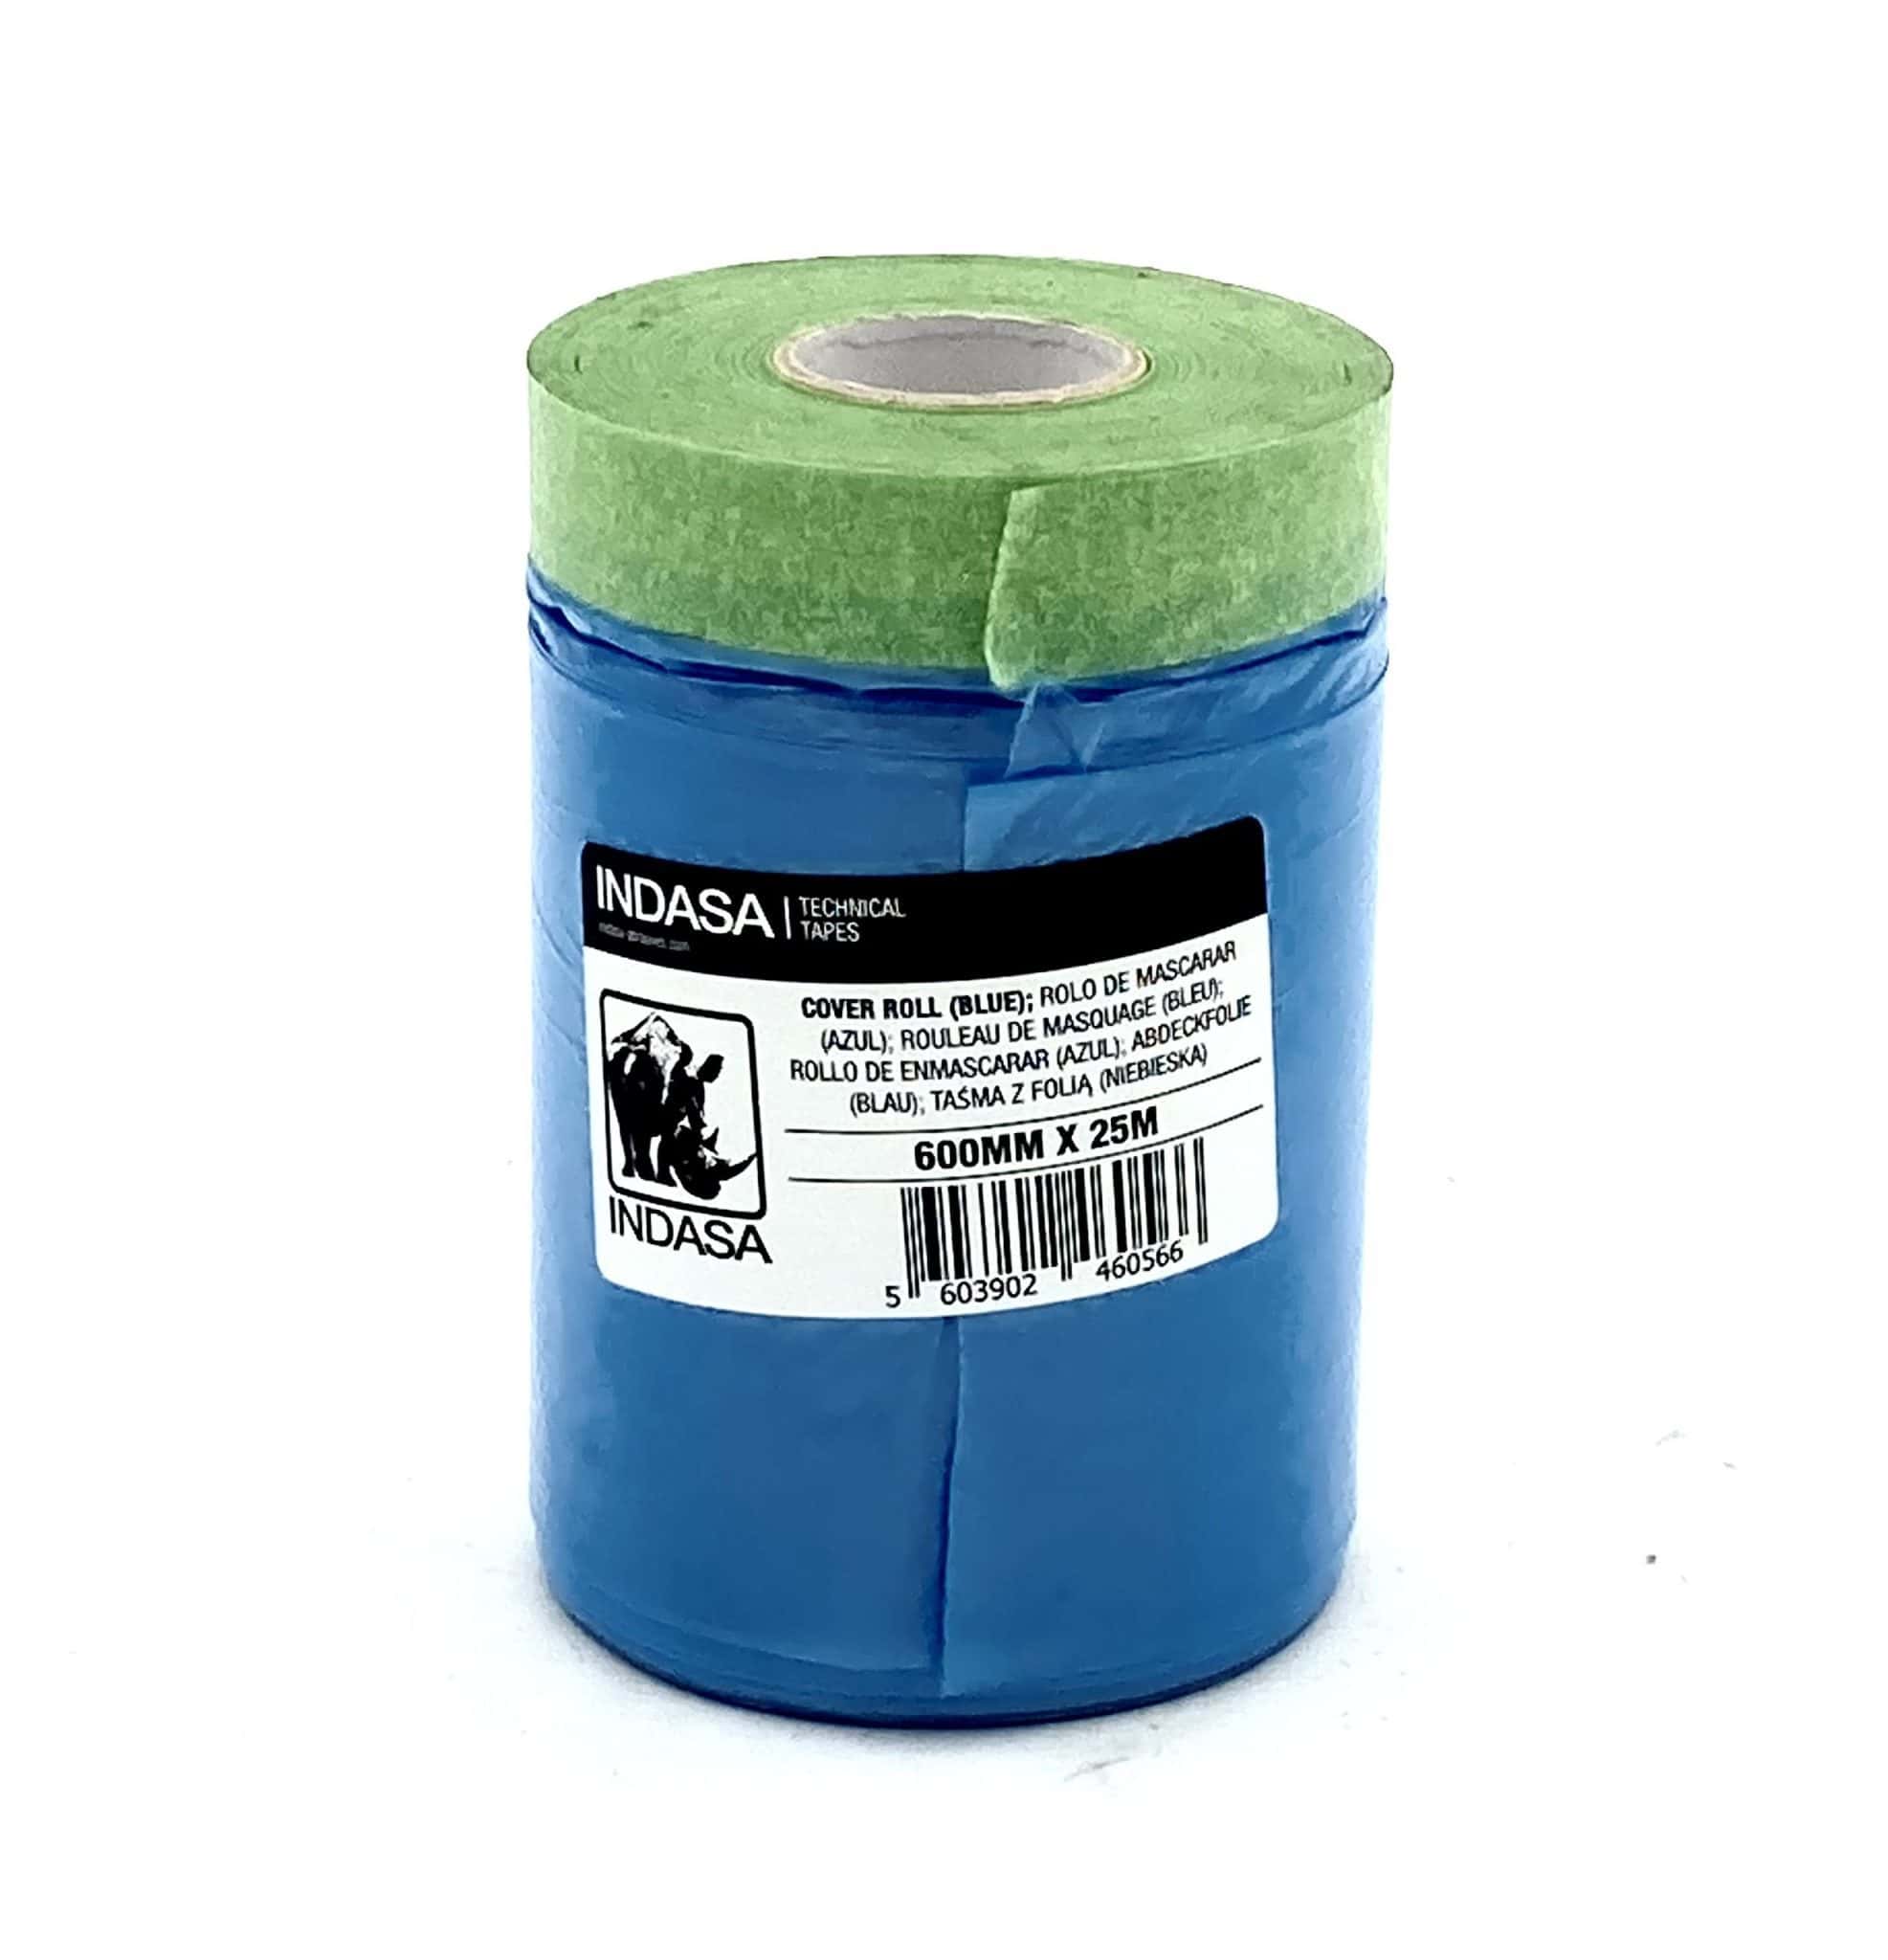 INDASA COVER TAPE/ROLL 14″ 2